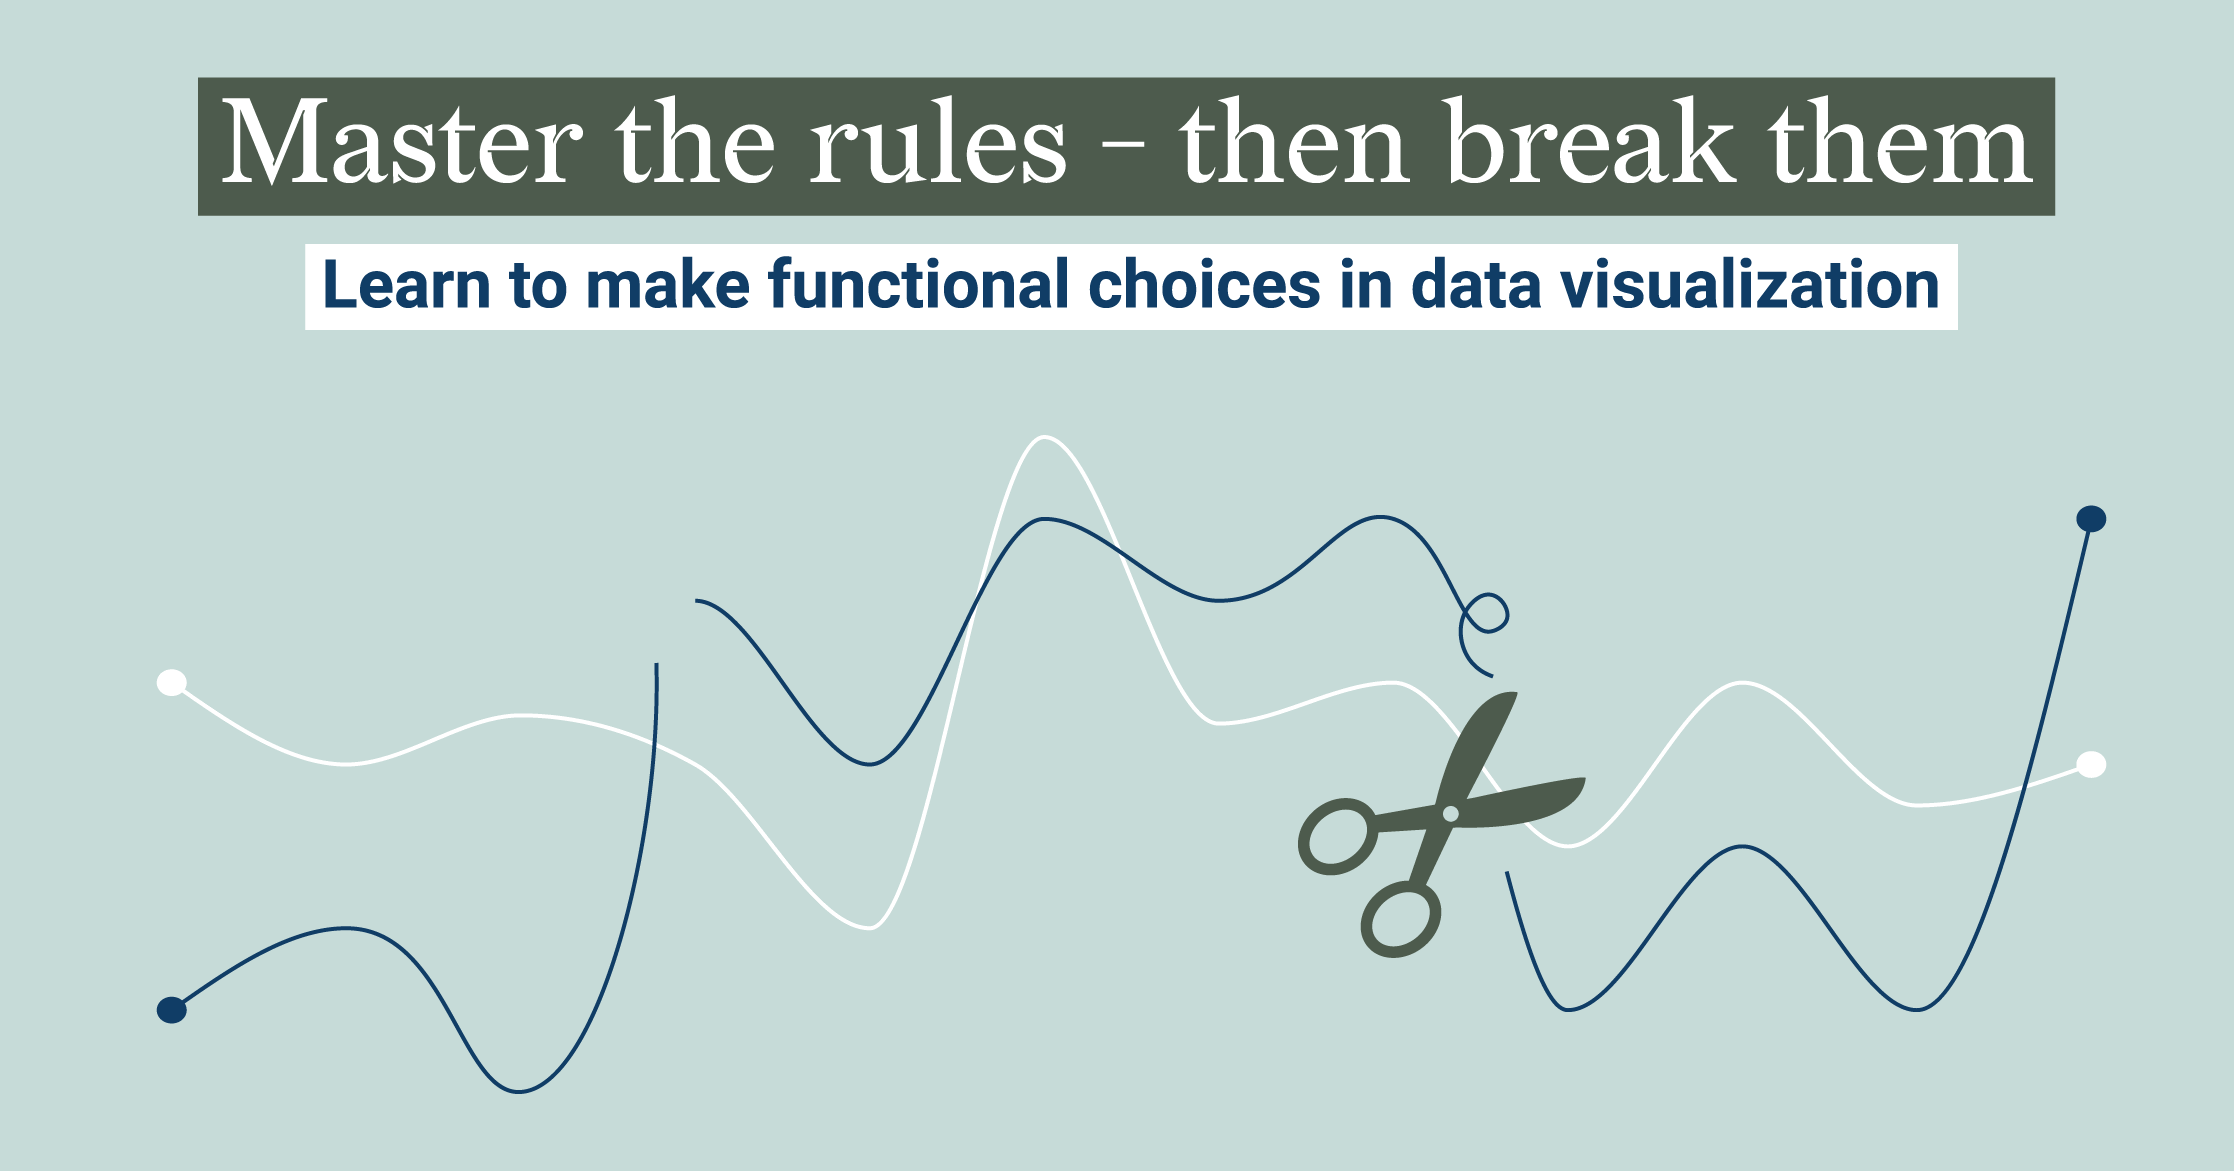 Master the rules - then break them. Learn to make functional choices in data visualization.